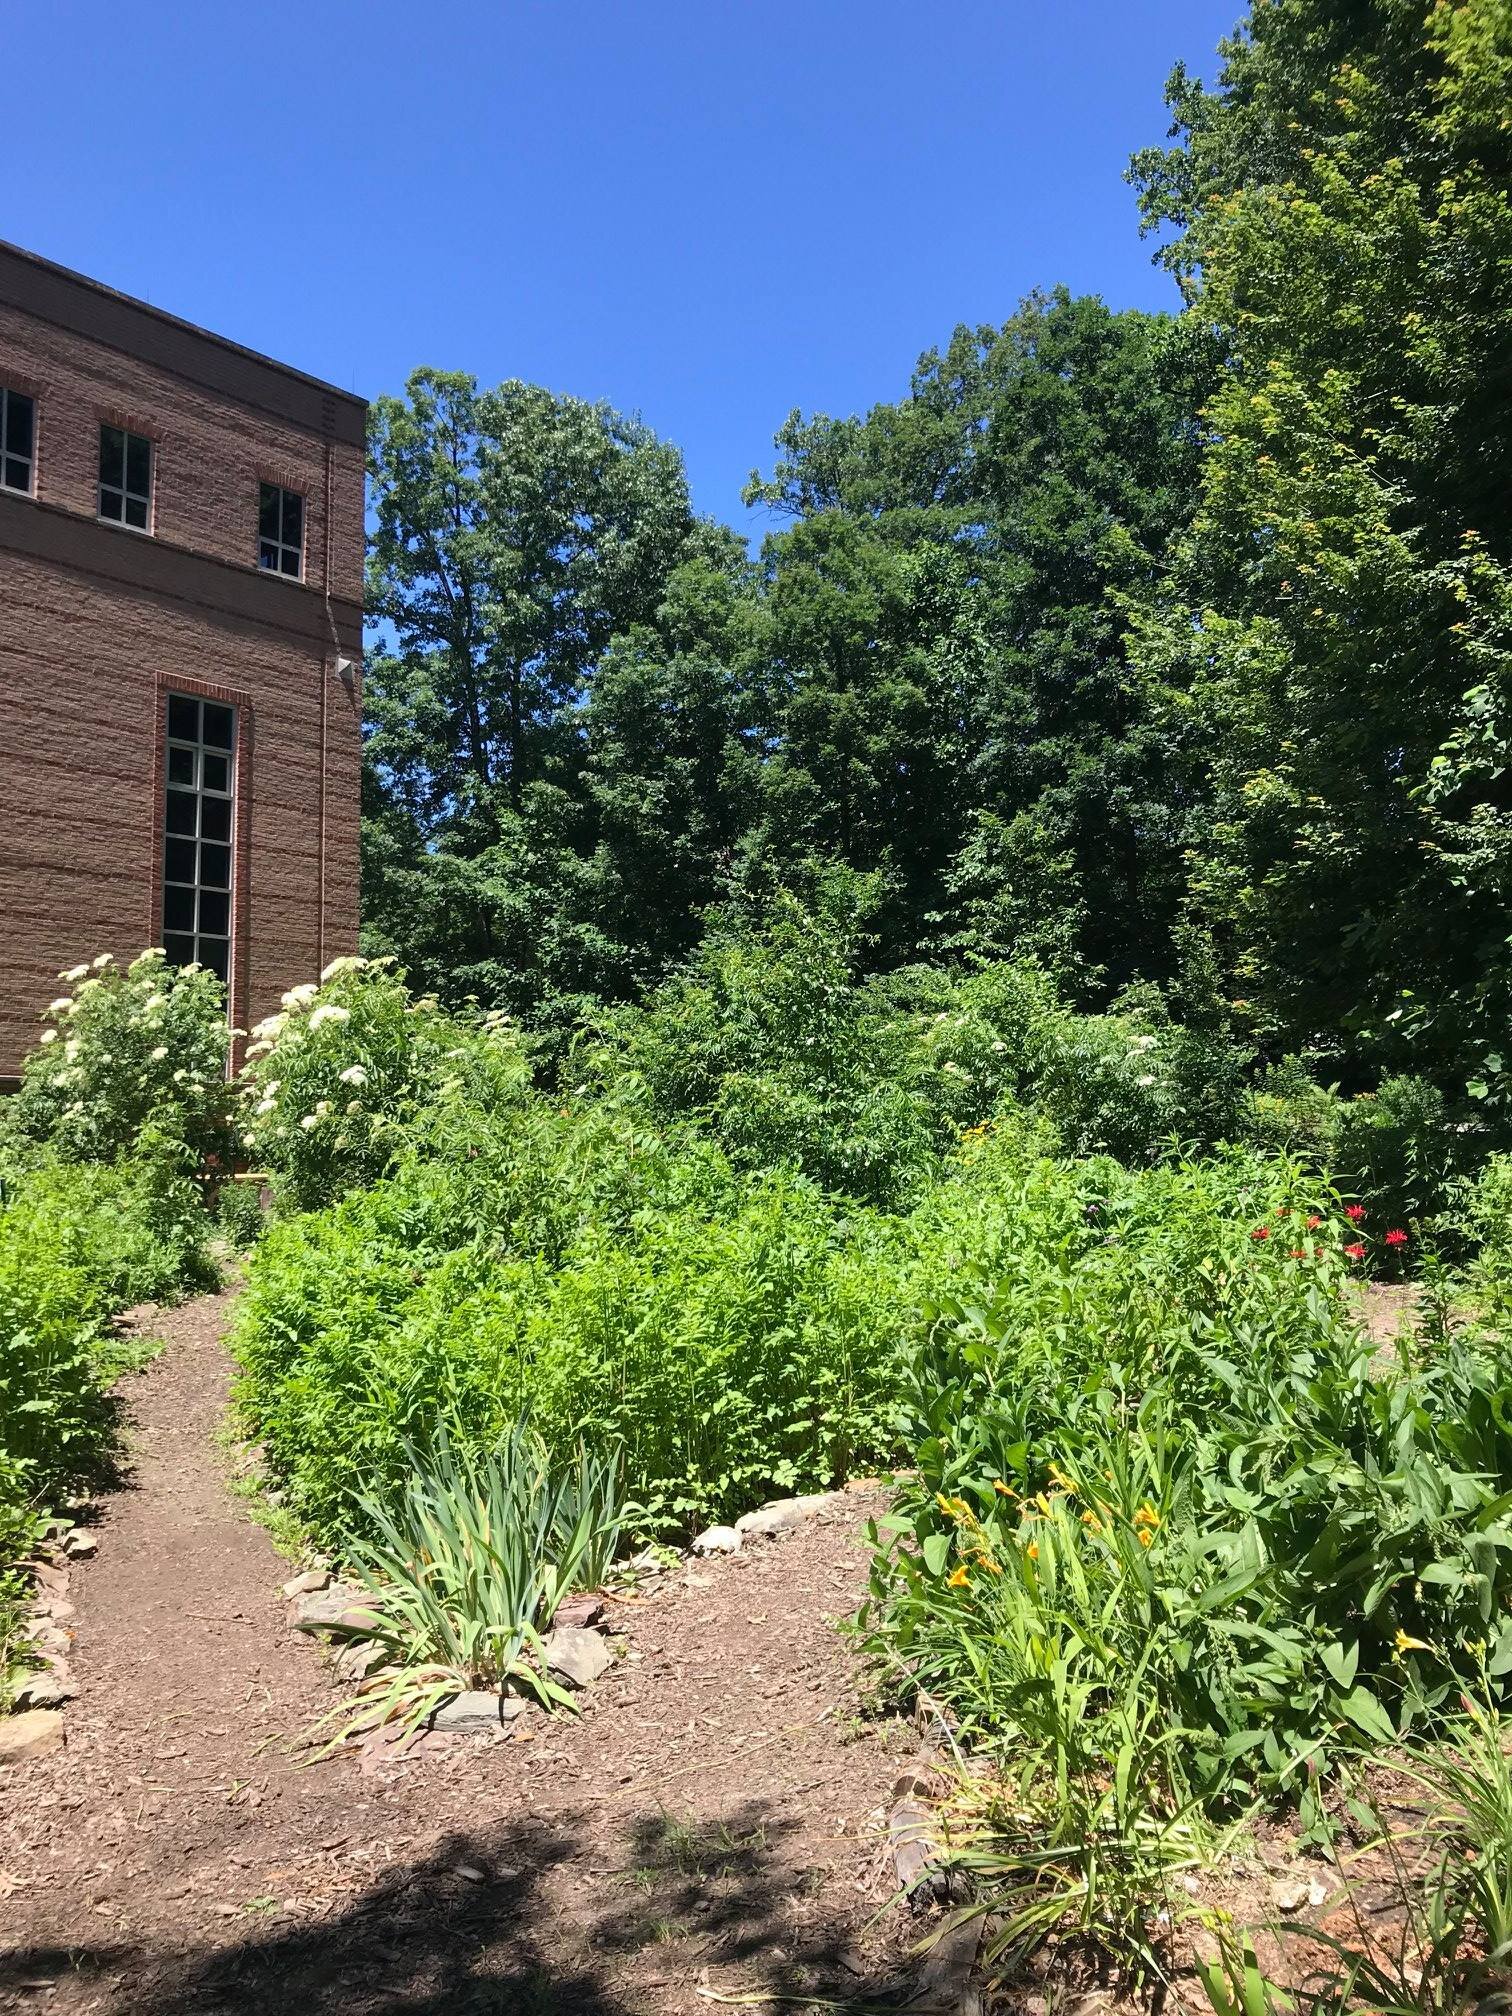 A great local example of permaculture is the Innovation Food Forest at George Mason University. Photos courtesy of George Mason's Sustainability Office. 